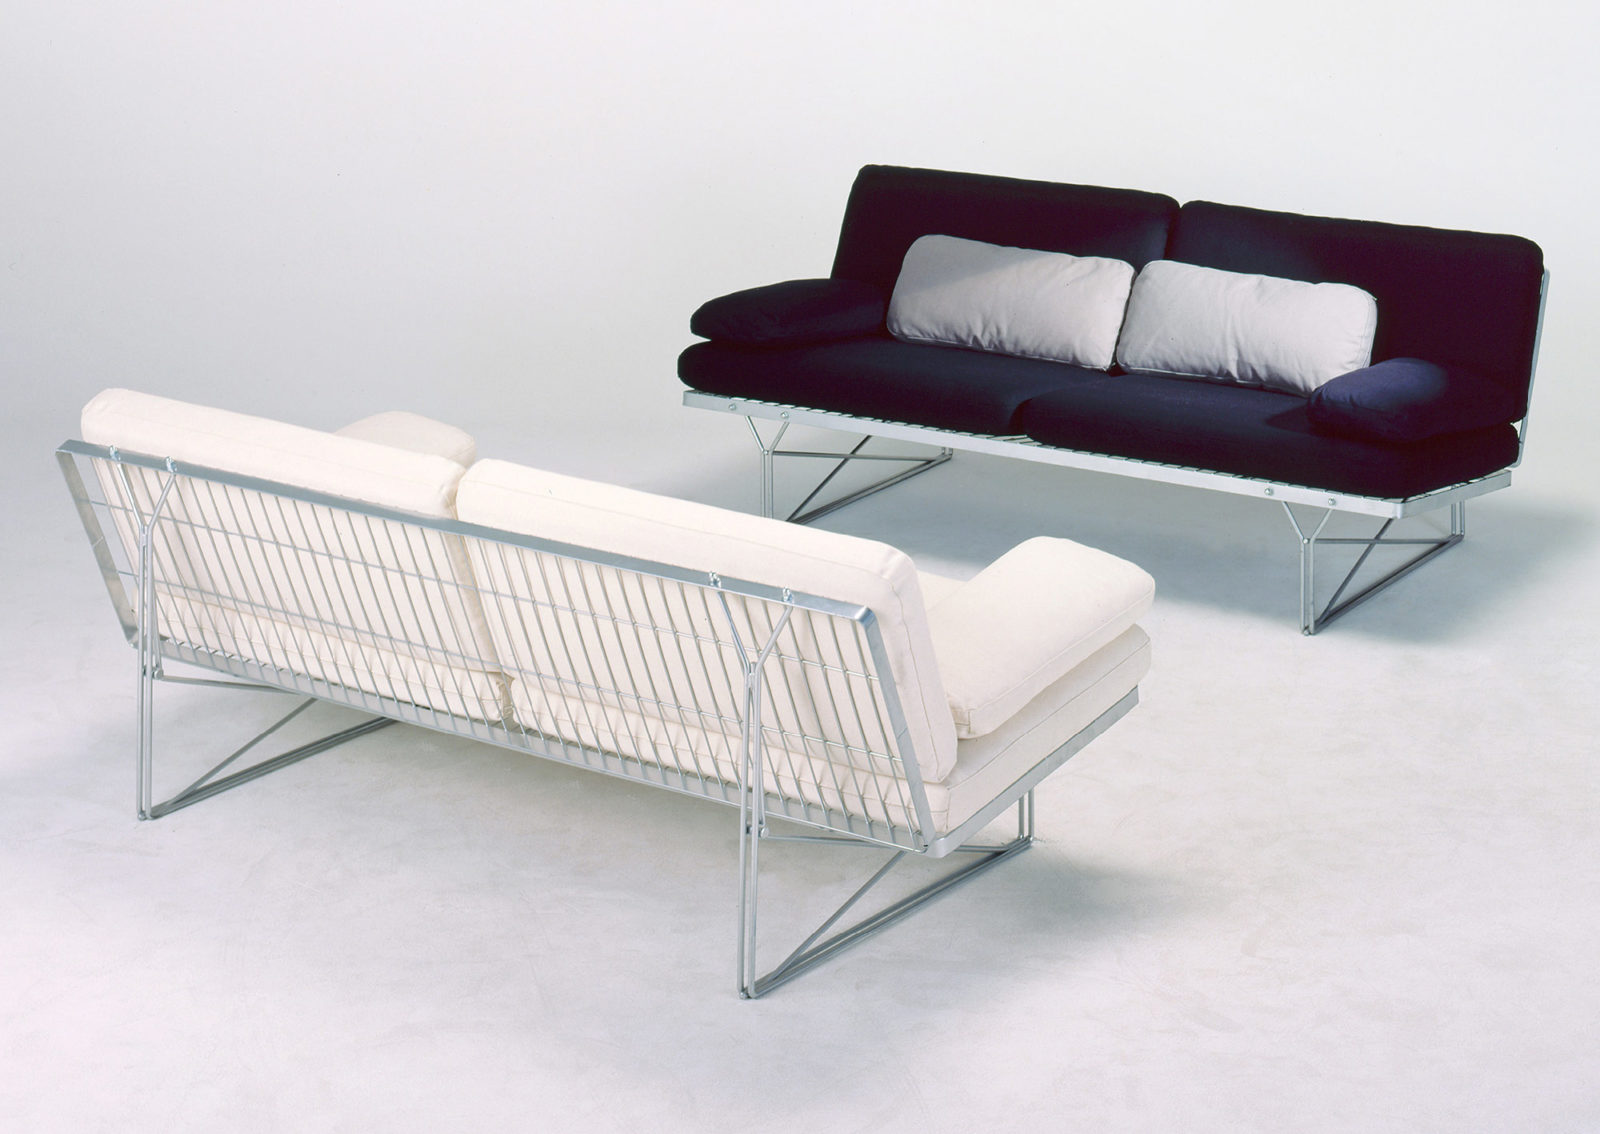 Two simple sofas, one white, one black, with a steel mesh underframe.